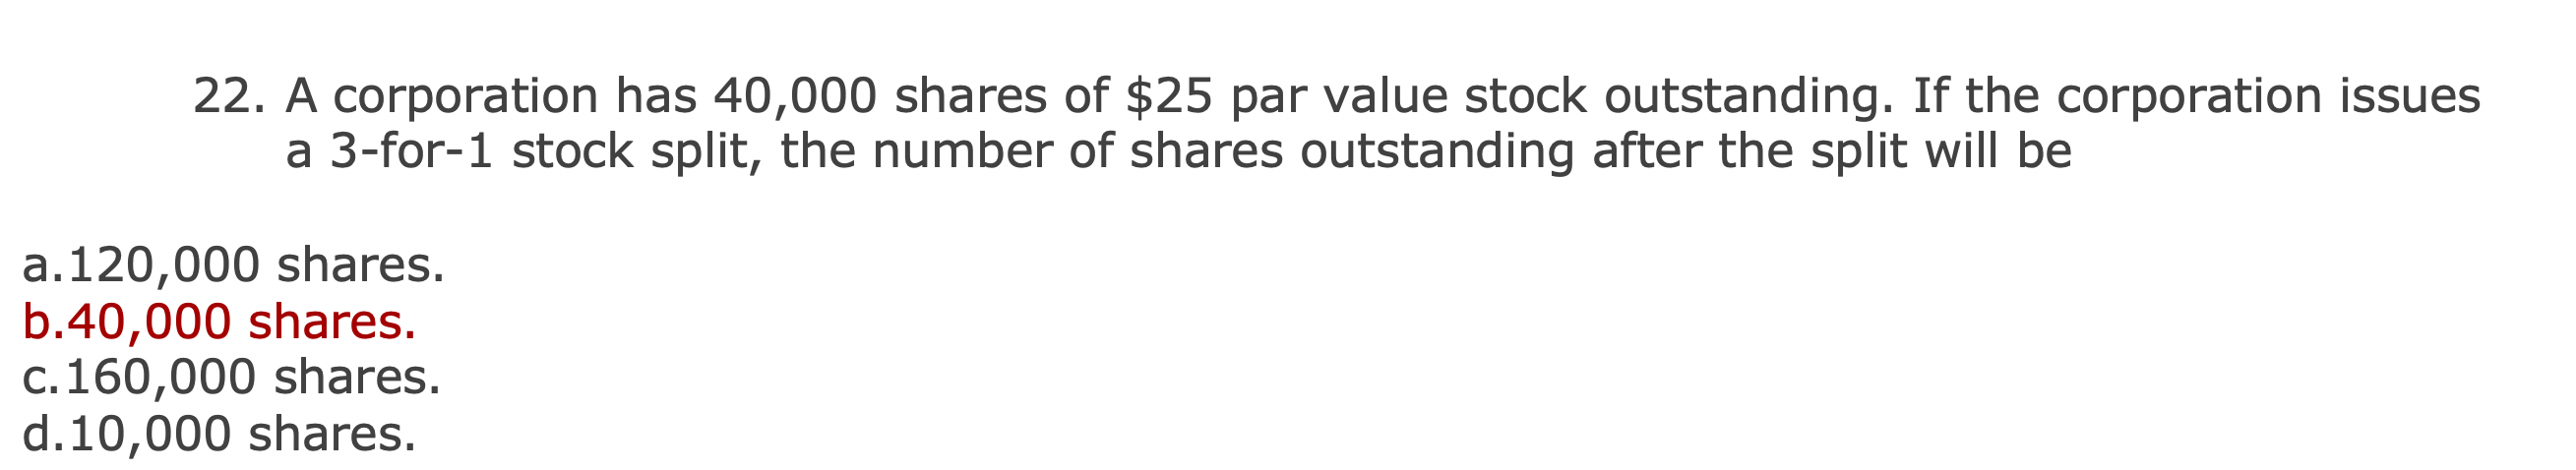 22. A corporation has 40,000 shares of $25 par value stock outstanding. If the corporation issues
a 3-for-1 stock split, the number of shares outstanding after the split will be
a.120,000 shares.
b.40,000 shares.
c.160,000 shares.
d.10,000 shares.
